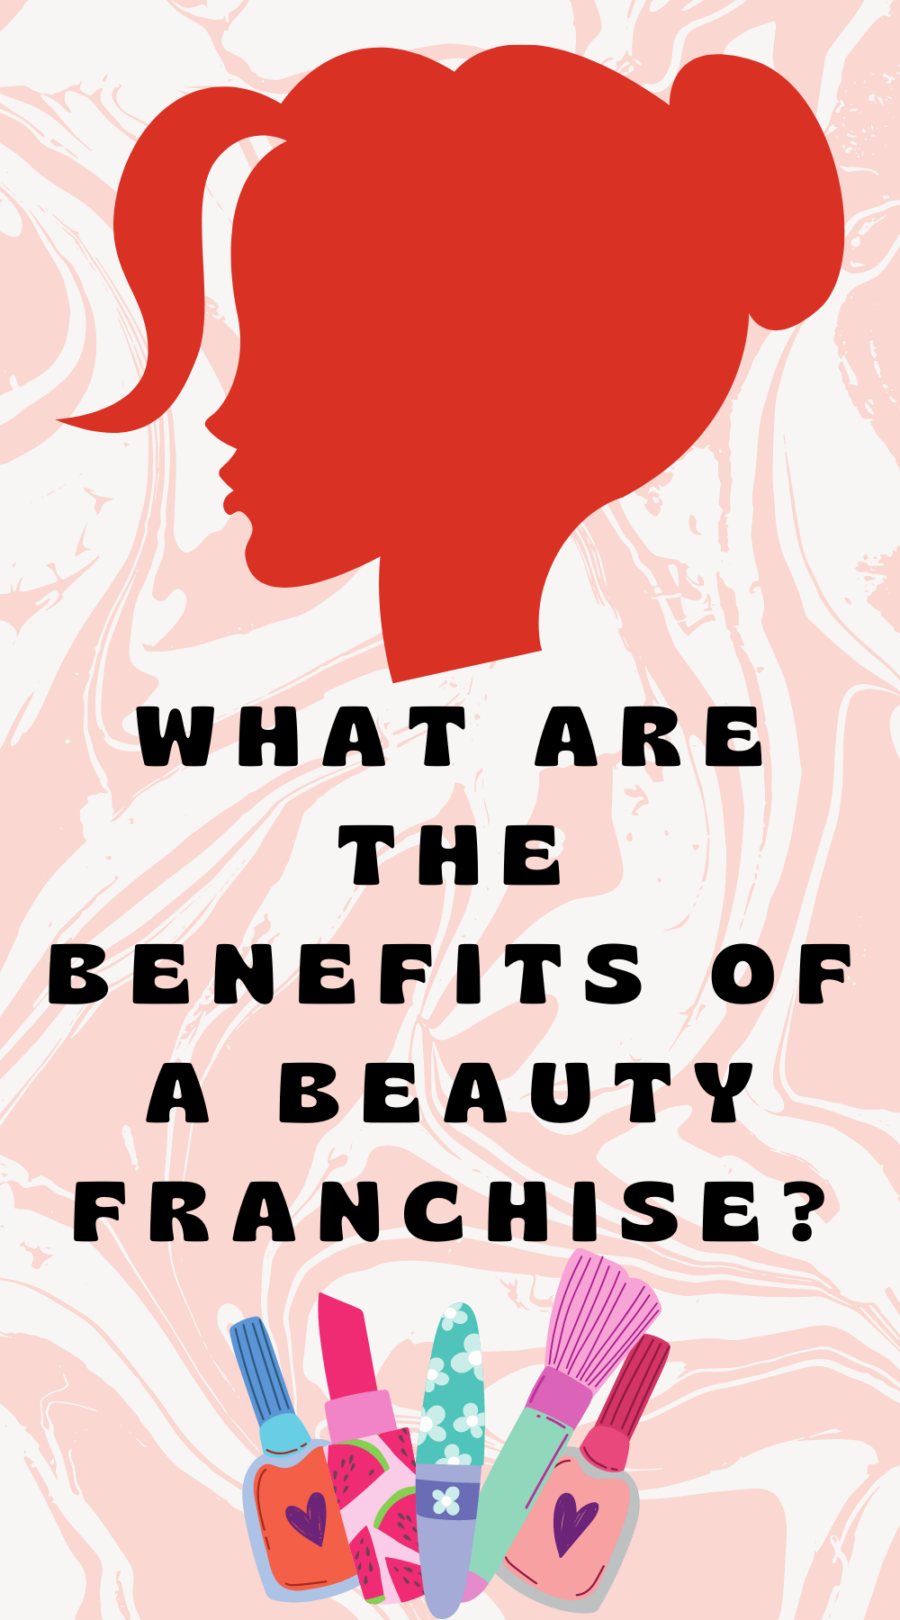 What are the benefits of a beauty franchise?